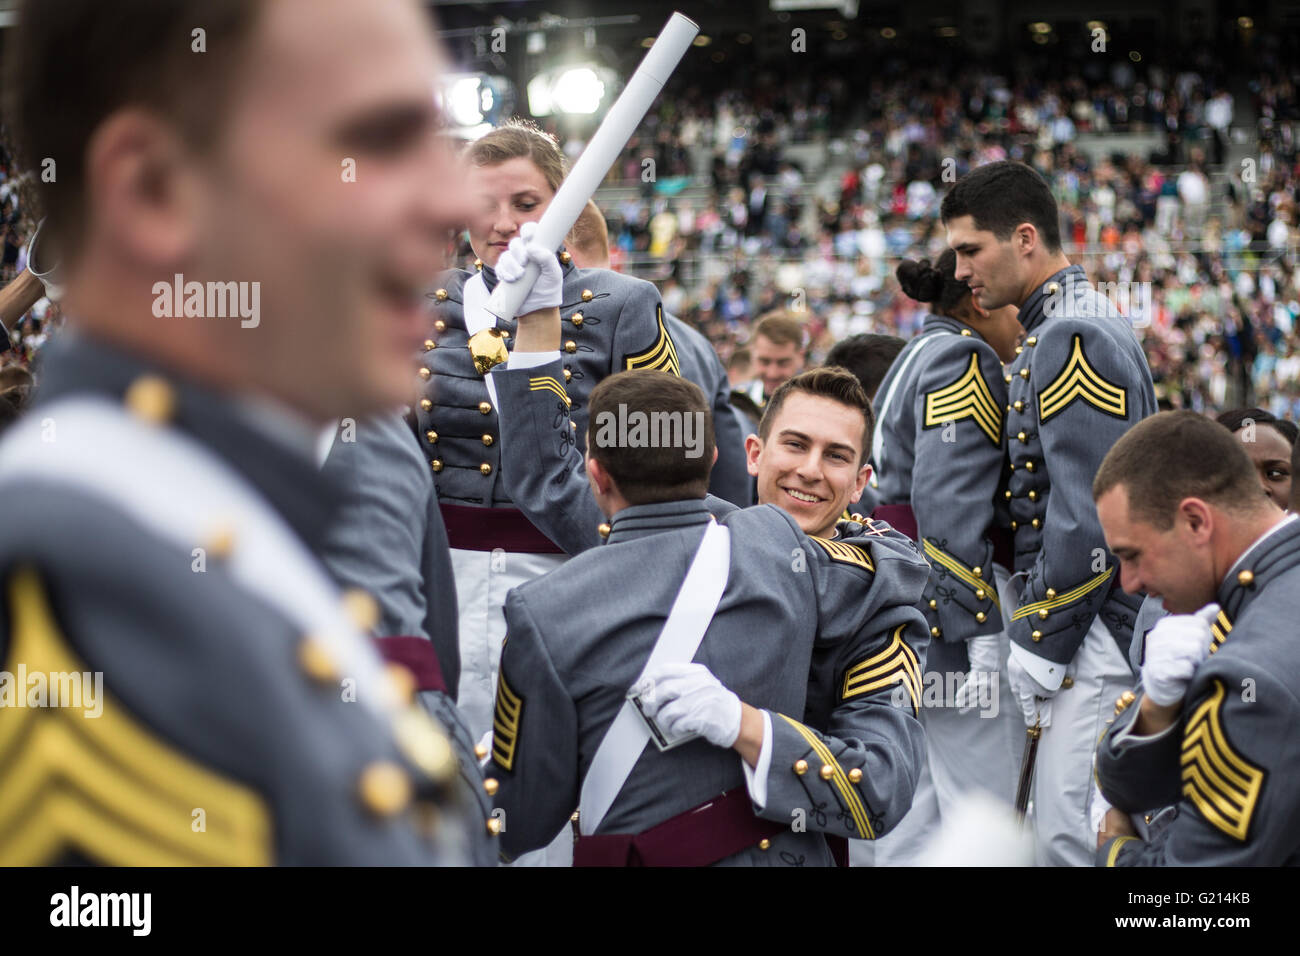 West Point, USA. 21st May, 2016. Graduating cadets congratulate each other during the commencement ceremony at the United States Military Academy at West Point, New York, the United States, May 21, 2016. Some 953 cadets received their degrees and commissions as second lieutenants on Saturday. Credit:  Li Muzi/Xinhua/Alamy Live News Stock Photo